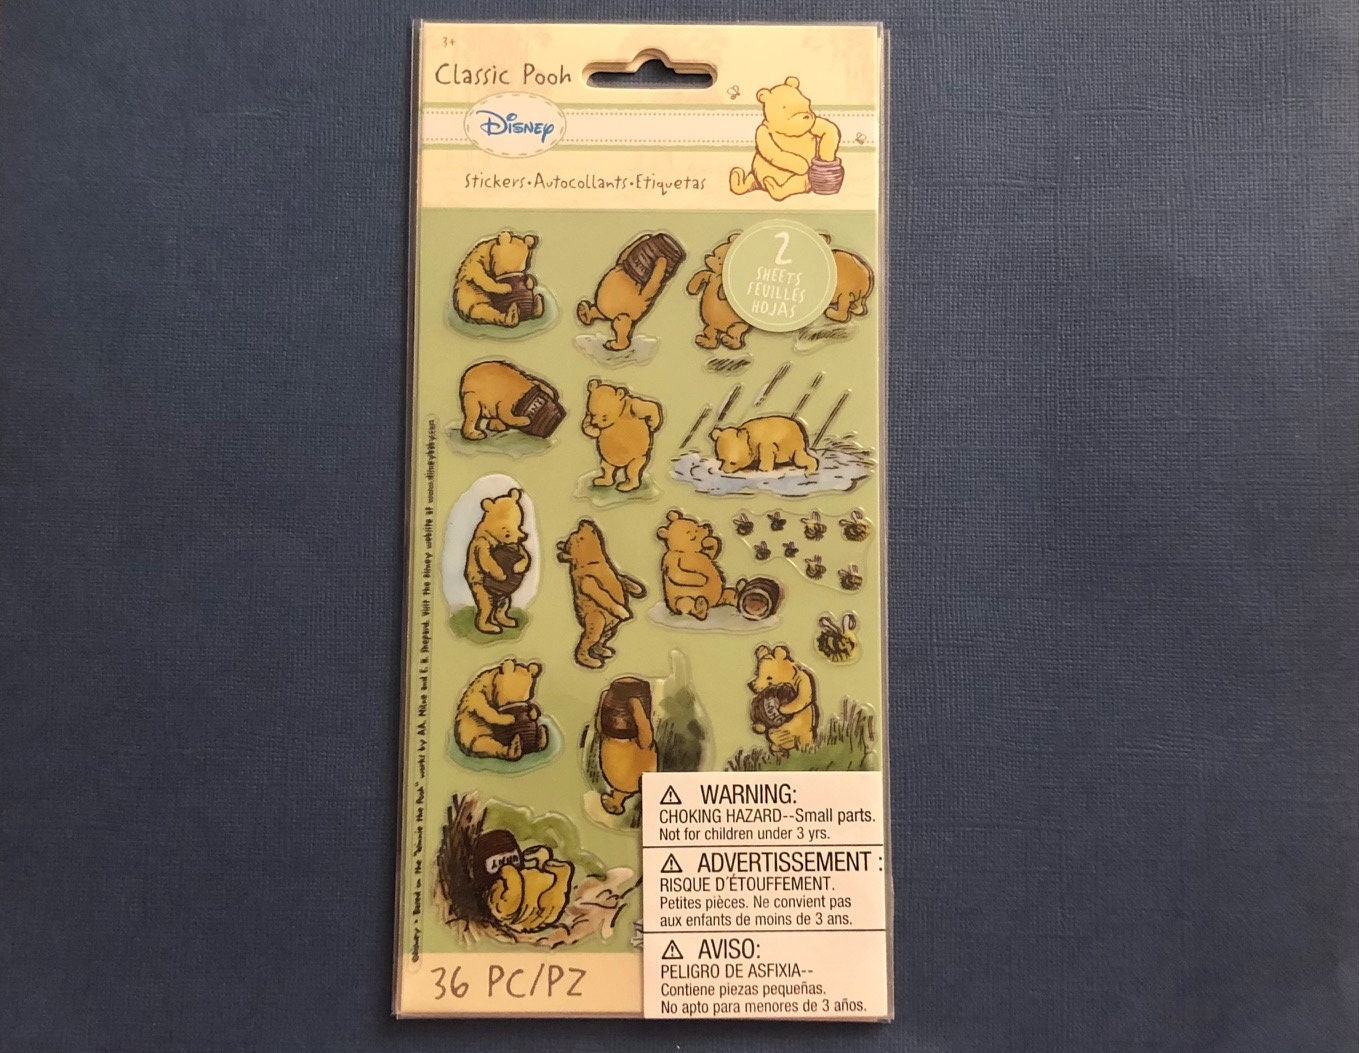 Disney's Winnie the Pooh Fun and Carefree 3D Raised Stickers (15 Stickers)  